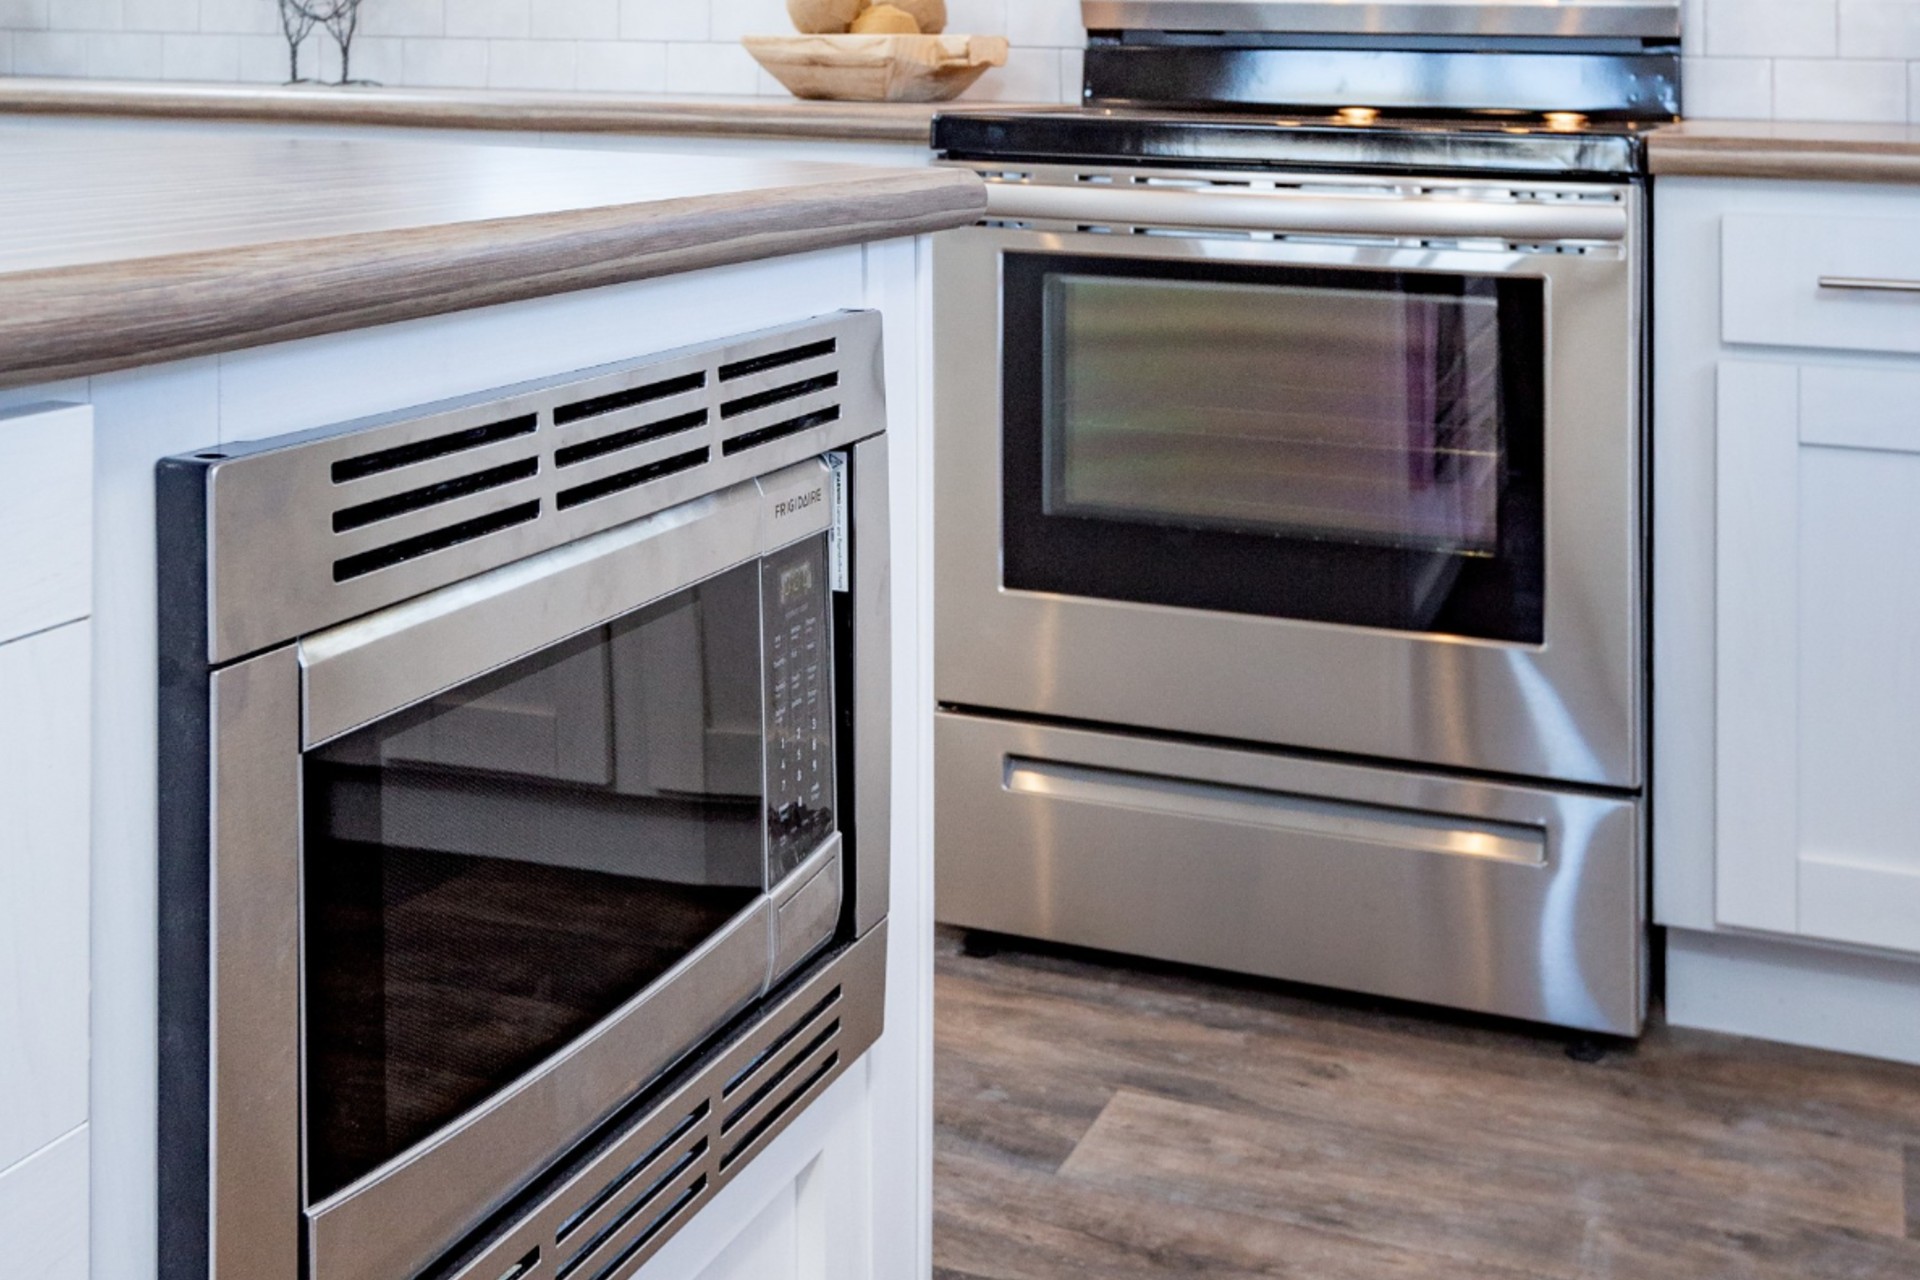 Frigidaire® offers modern, family-friendly designs purposefully crafted with time-saving solutions, like premium fingerprint-resistant Smudge-Proof® finishes.